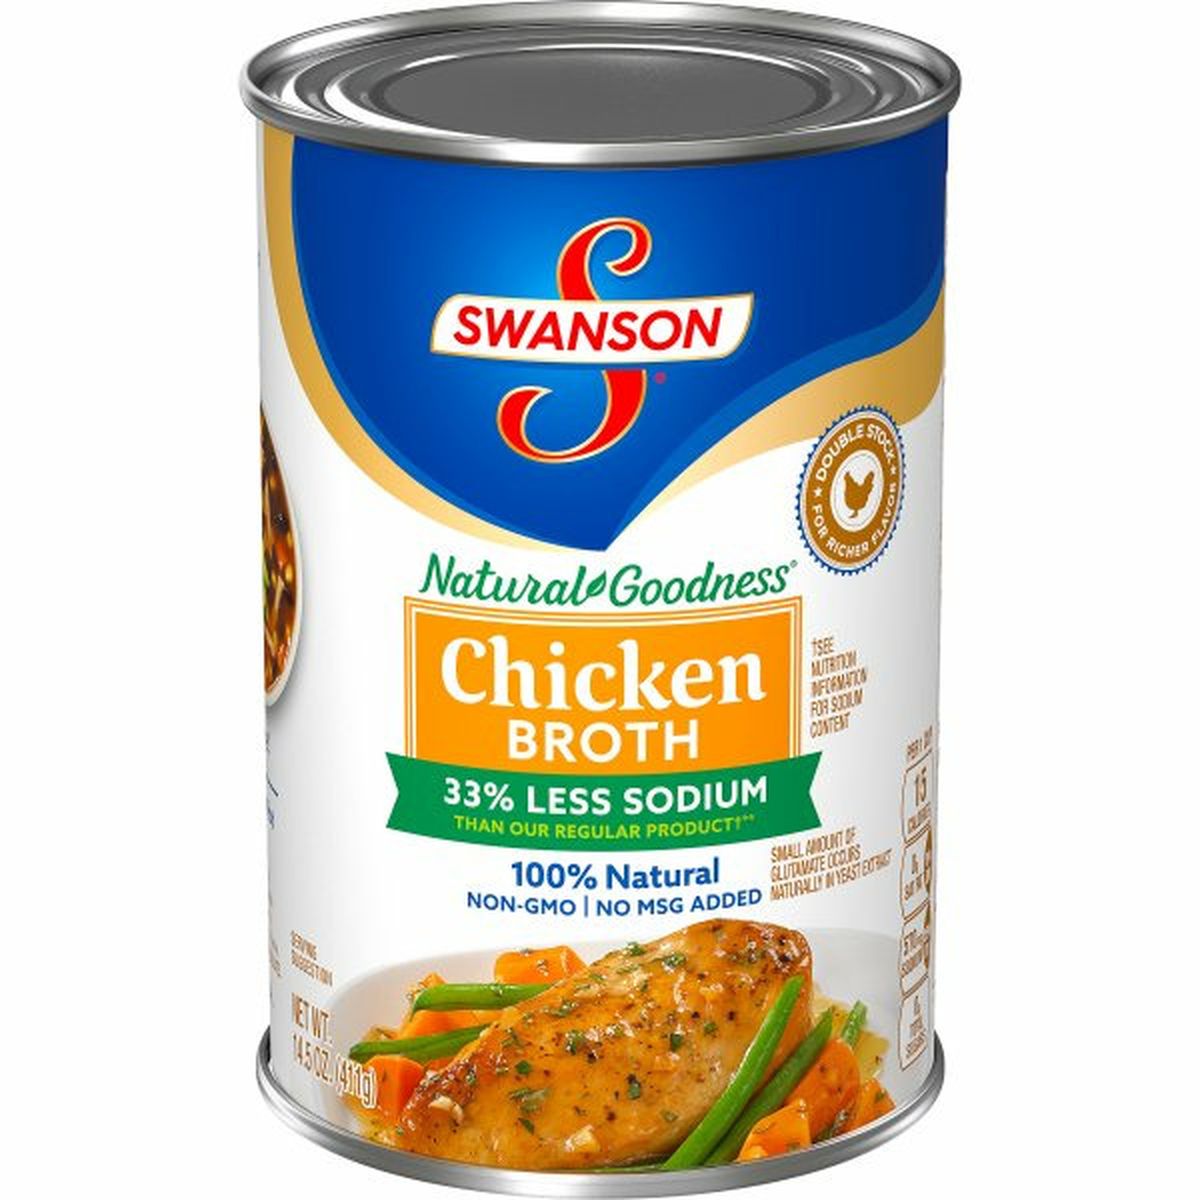 Calories in Swansons Natural Goodness Chicken Broth